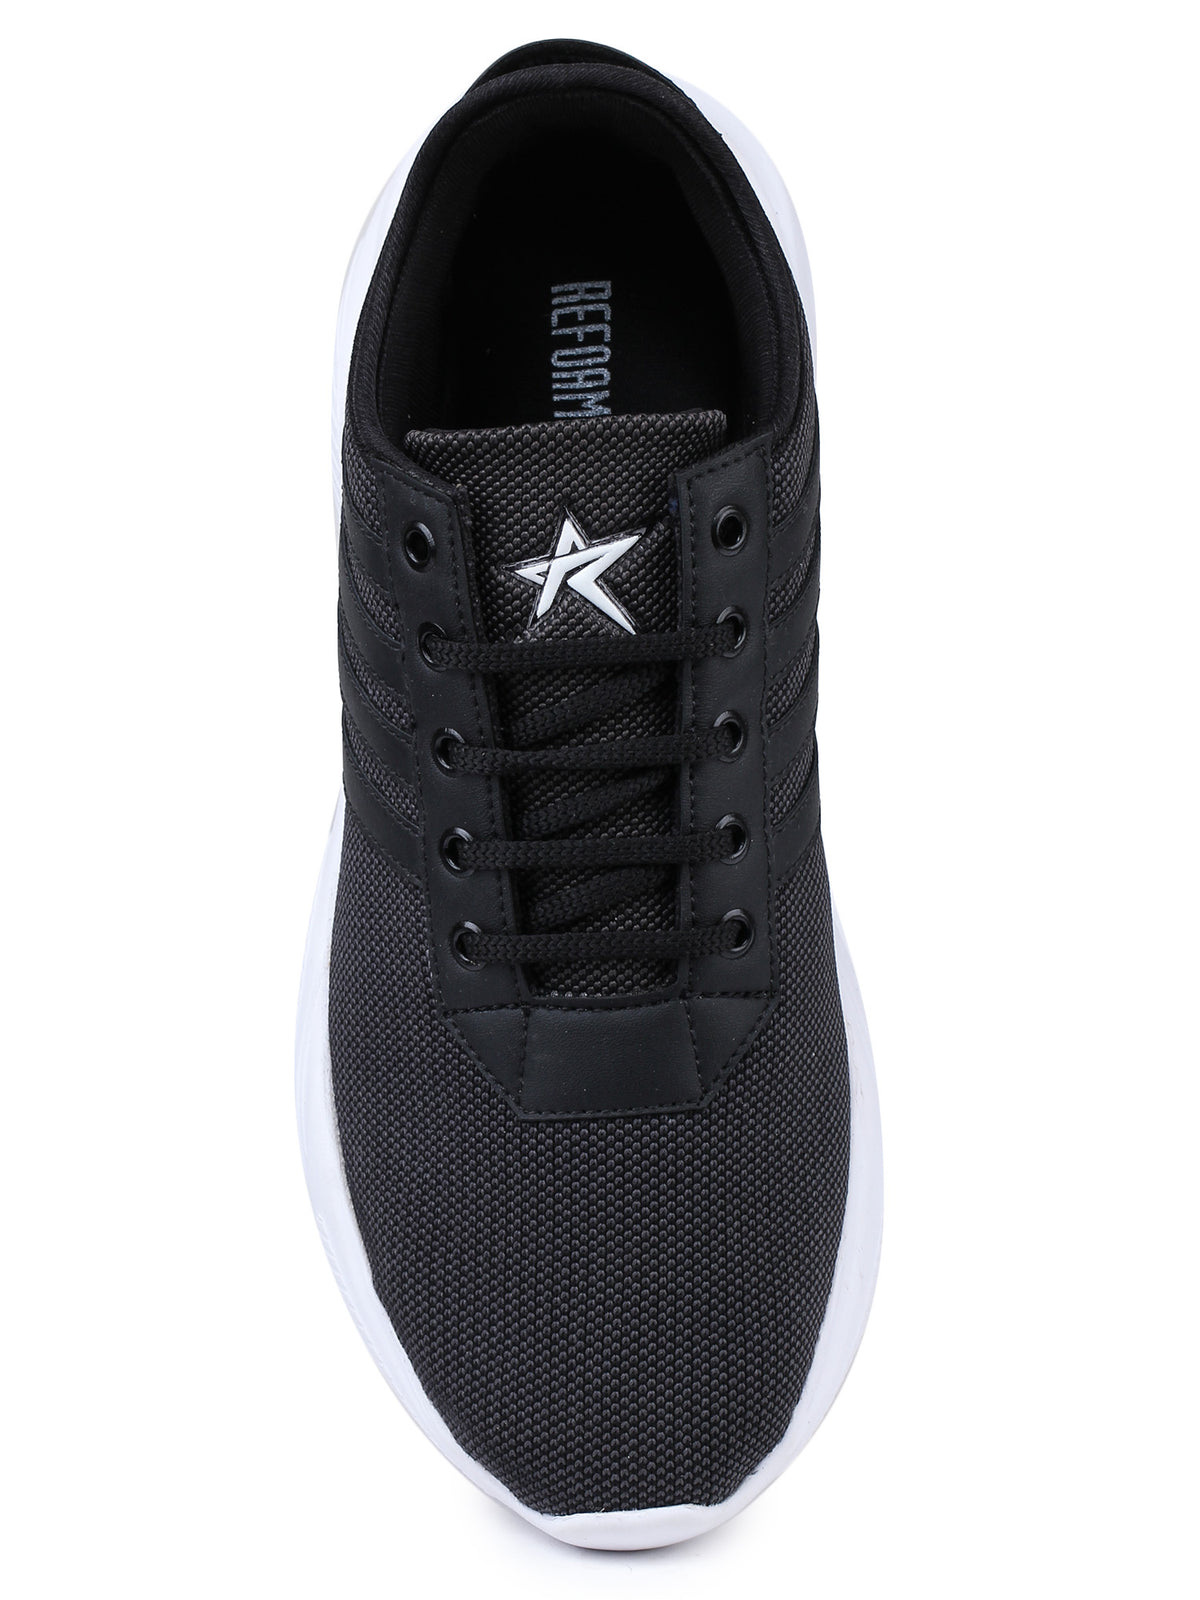 Black Solid Mesh Lace Up Lifestyle Casual Shoes For Men